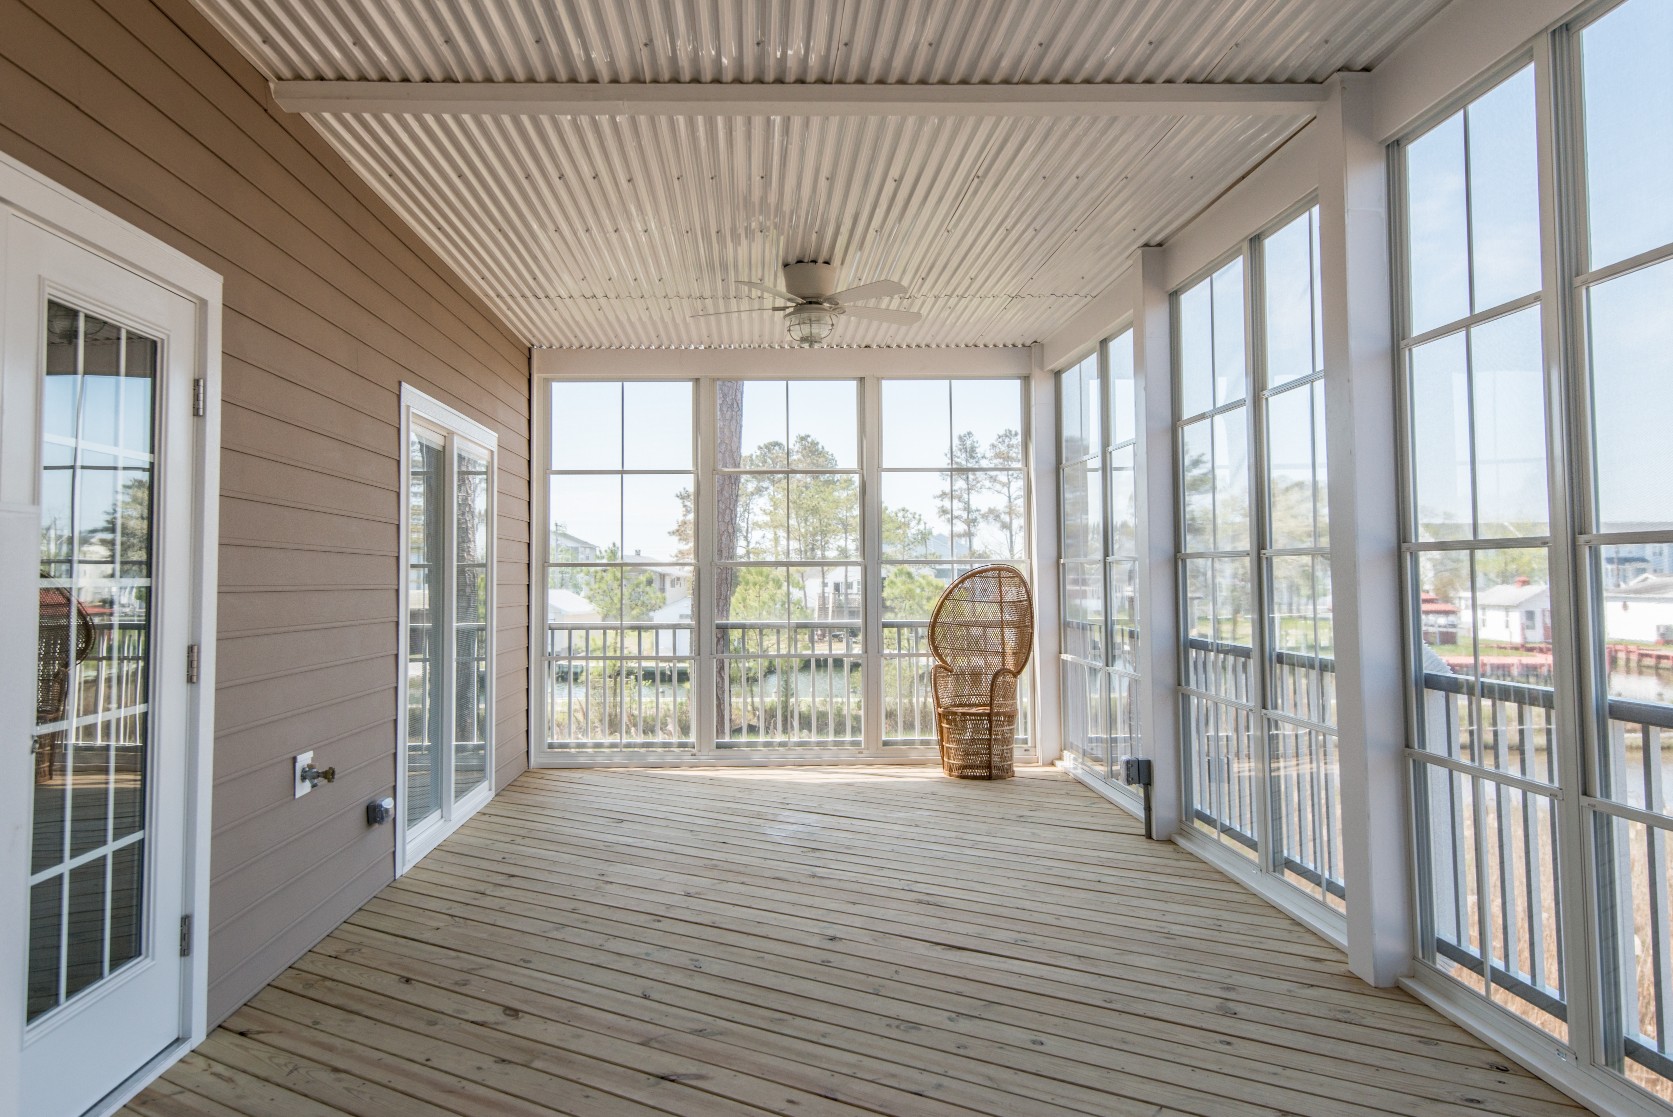 Whitesview Court Sunroom in Ocean View DE Four Season Sunroom with Storm Door and Ceiling Fan